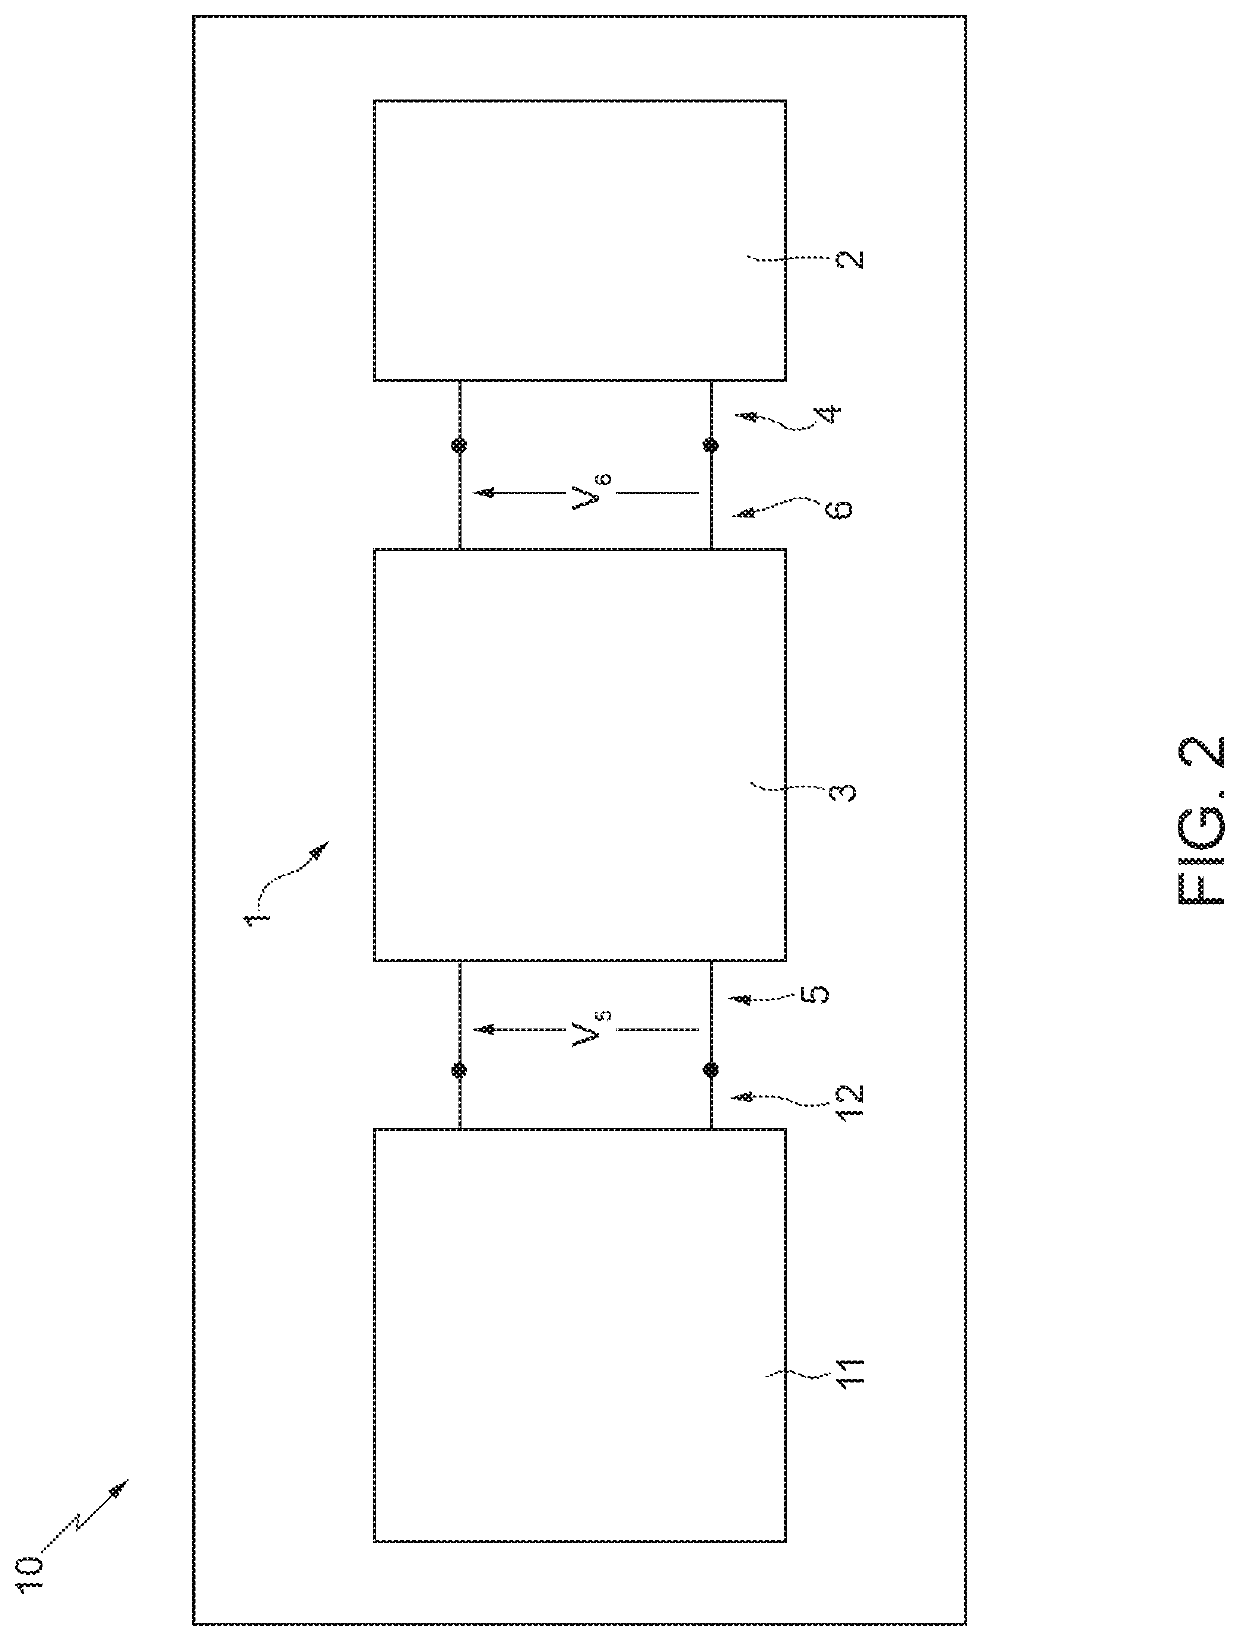 Control assembly of a solenoid valve, solenoid valve assembly and associated methods